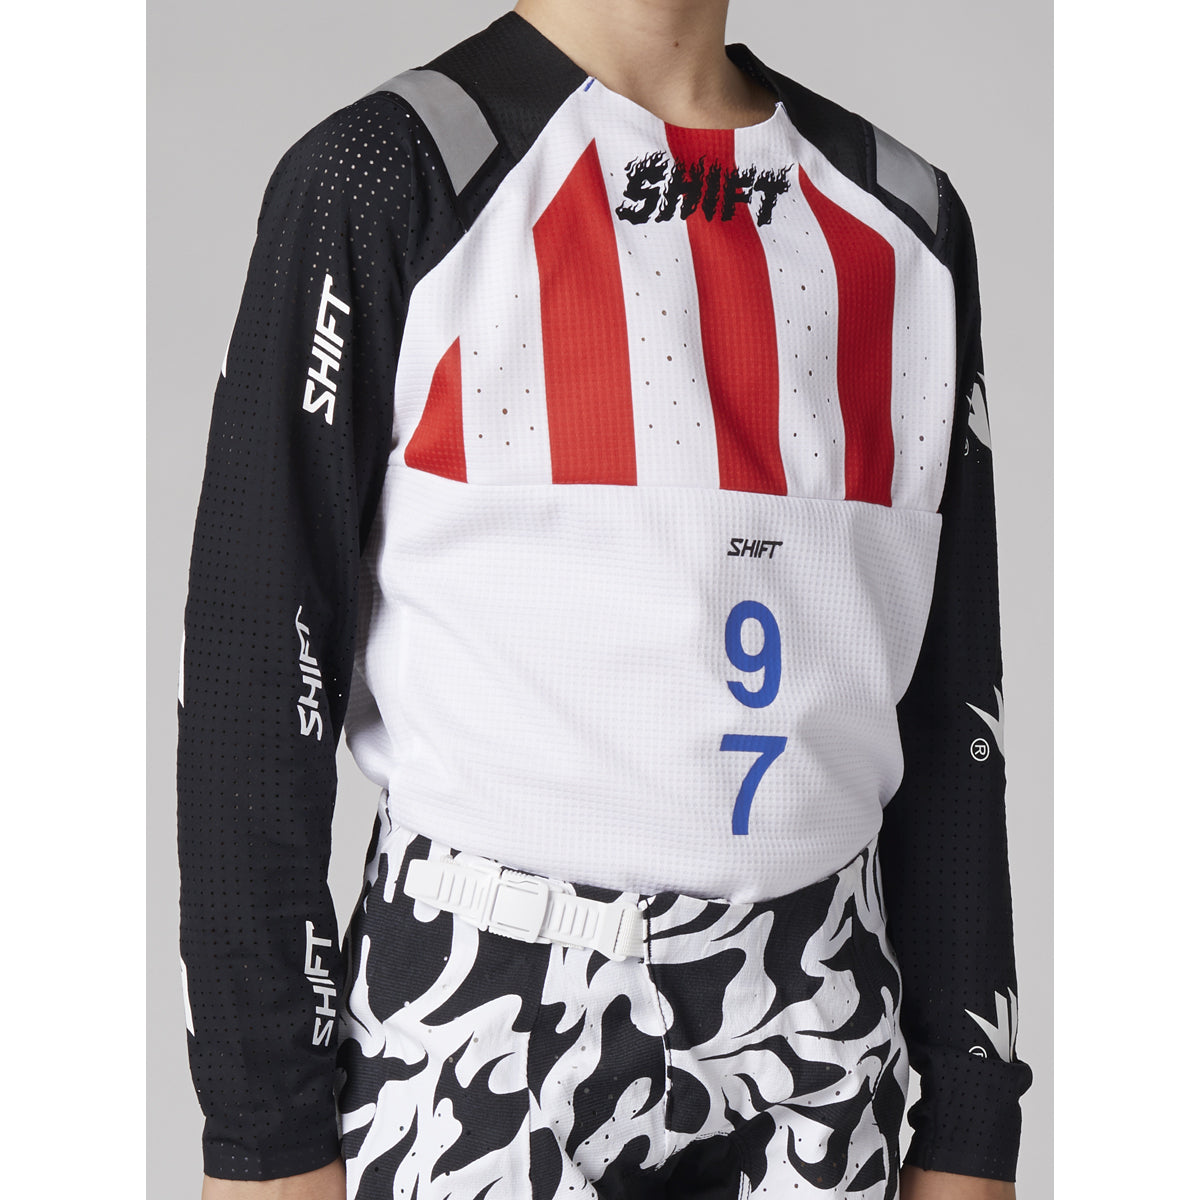 Youth Blue Label Flame Jersey White/Black